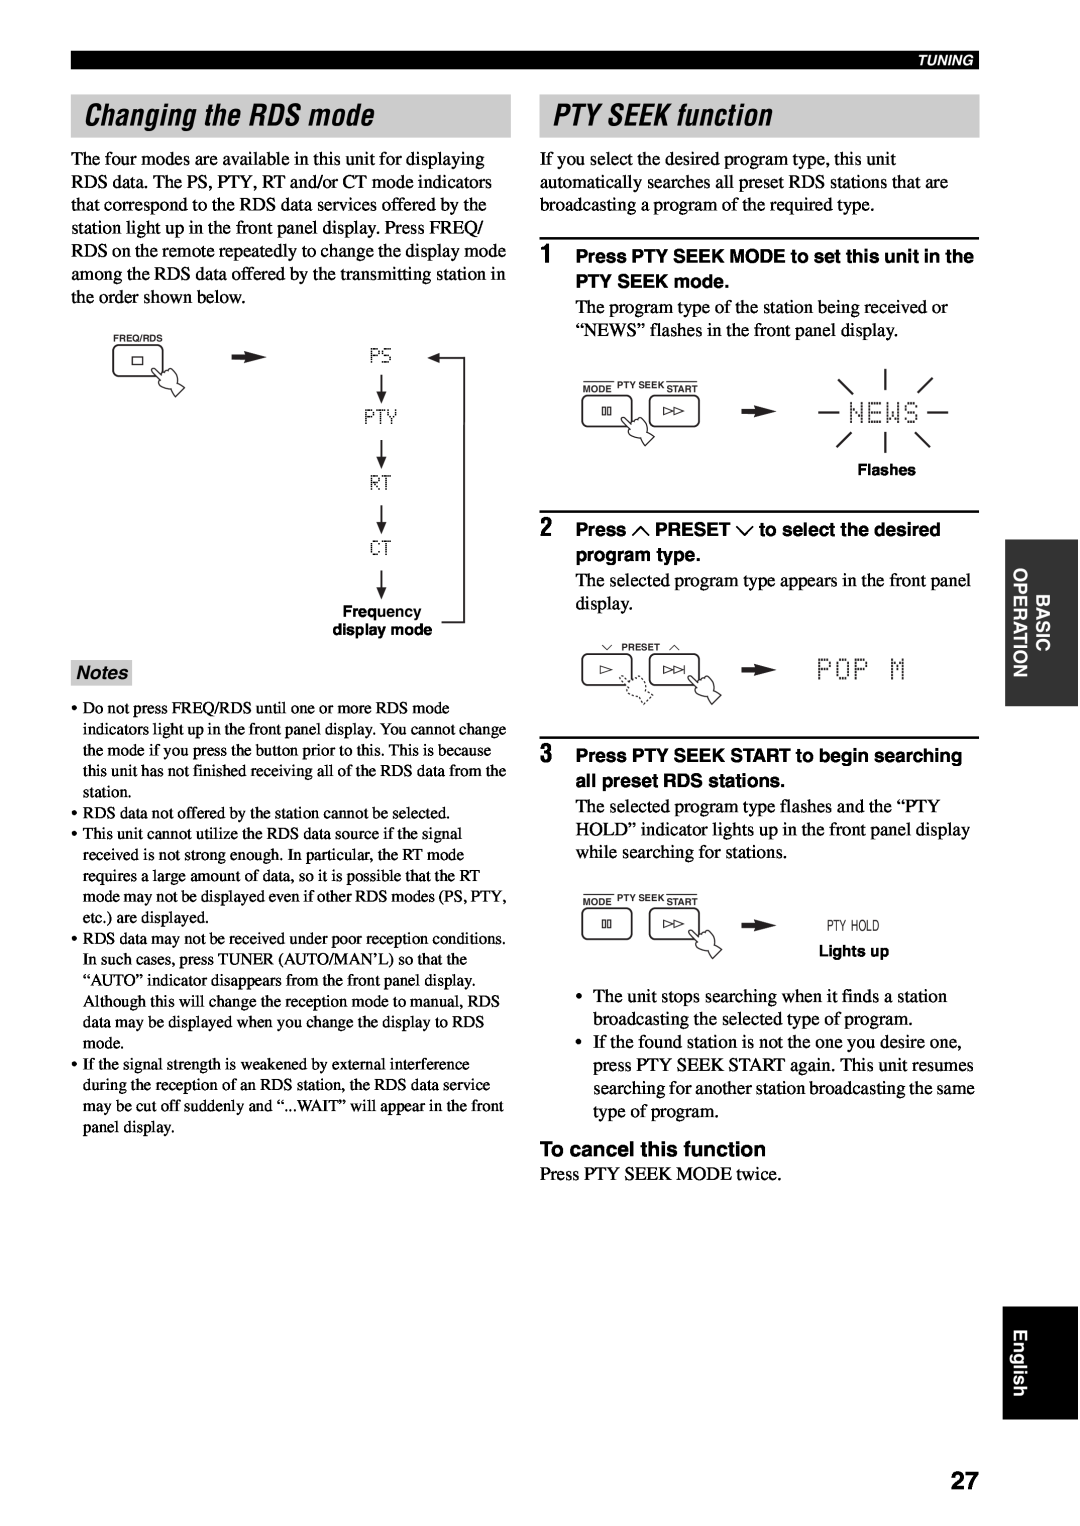 Yamaha RX-SL80 owner manual Changing the RDS mode, PTY SEEK function, To cancel this function 